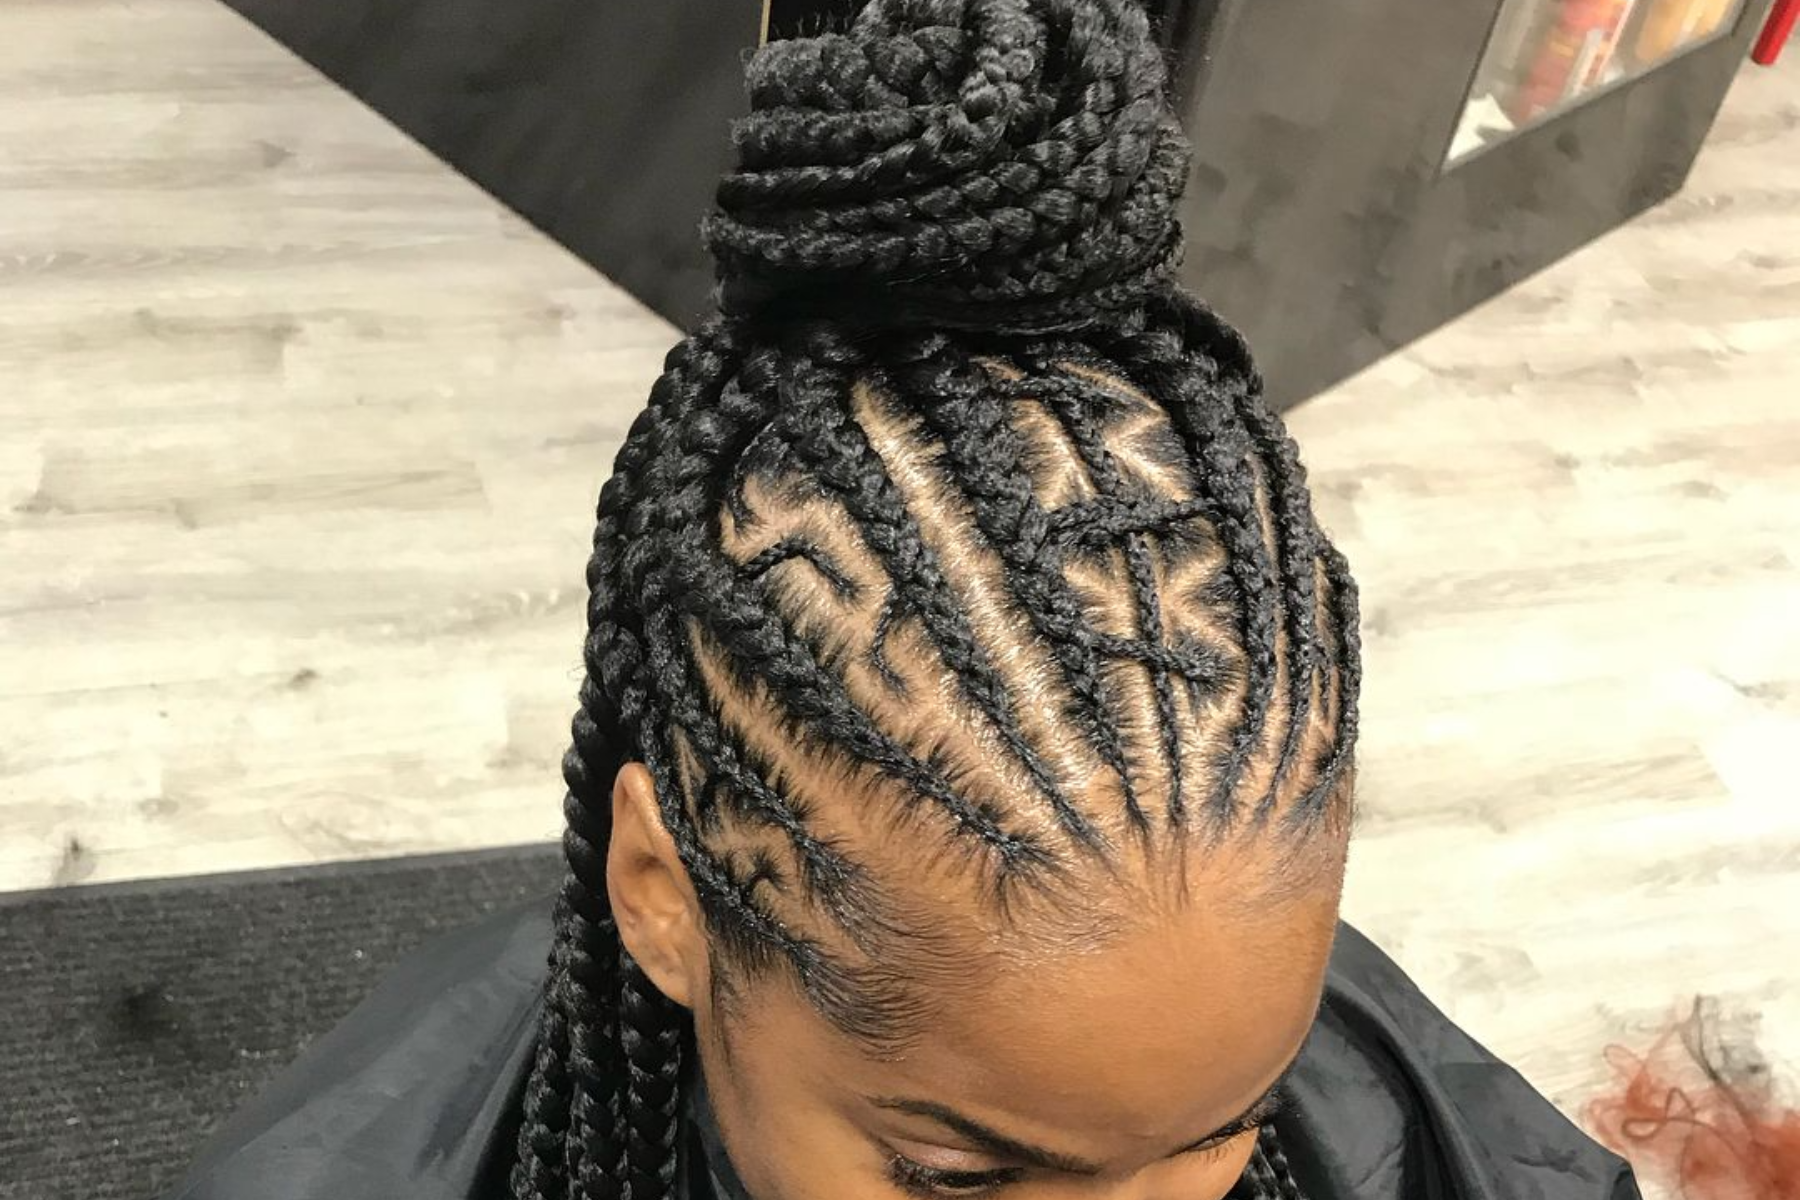 Black Women Don't Need Comments On Their Hair At Work